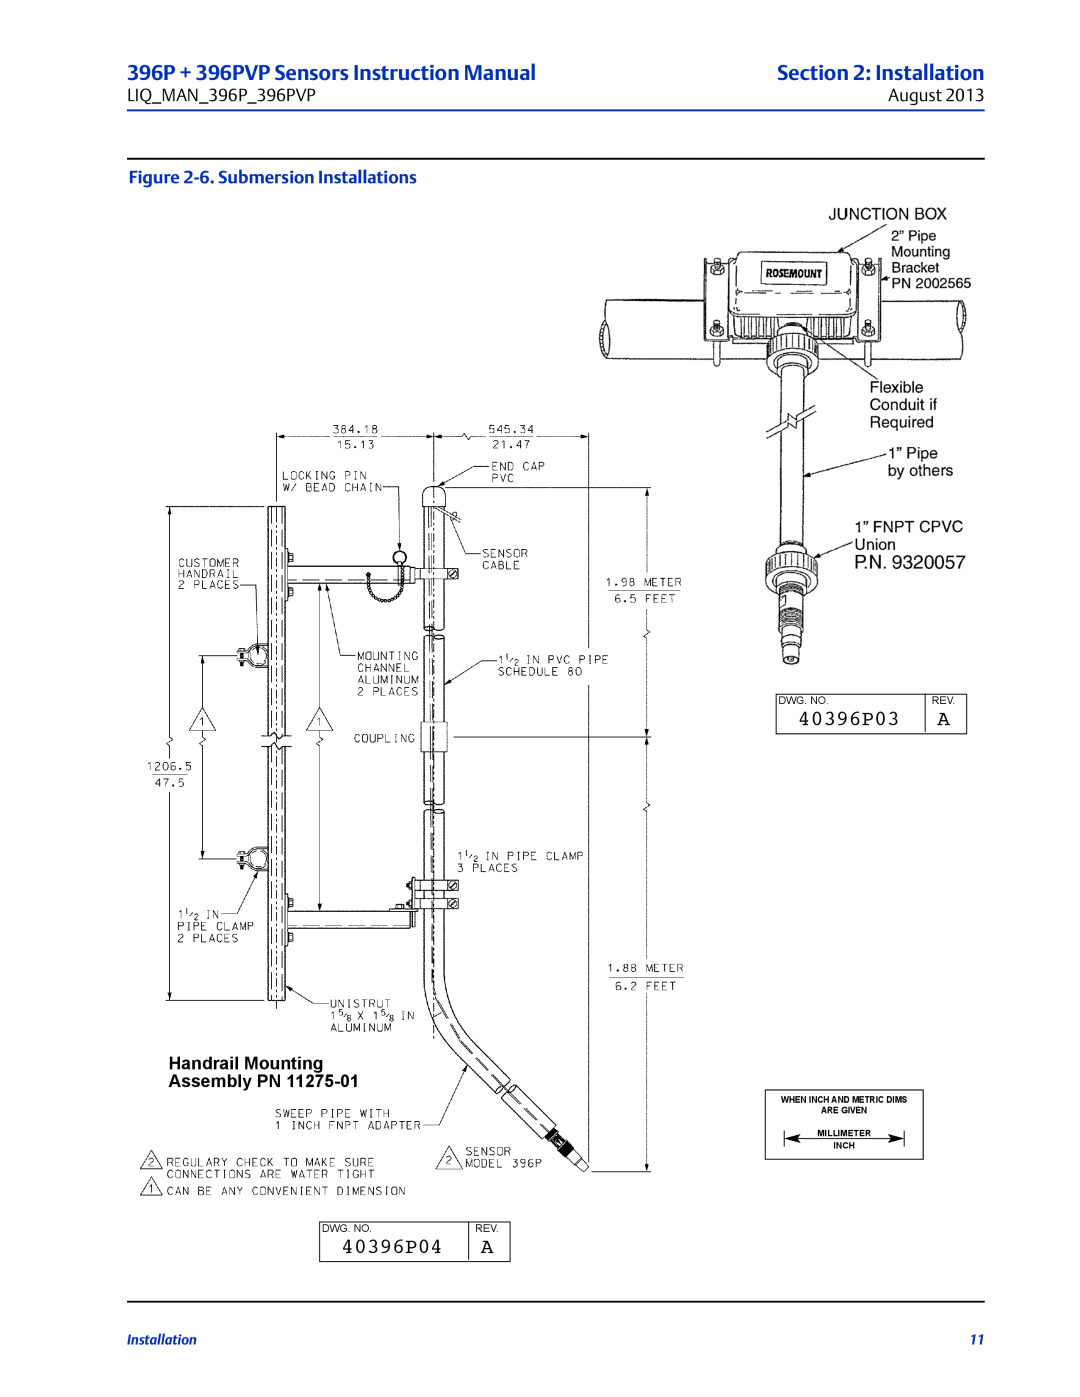 Emerson 40396P03, 40396P04, LIQ MAN 396P 396PVP, August, 6.Submersion Installations, Handrail Mounting assembly pN 